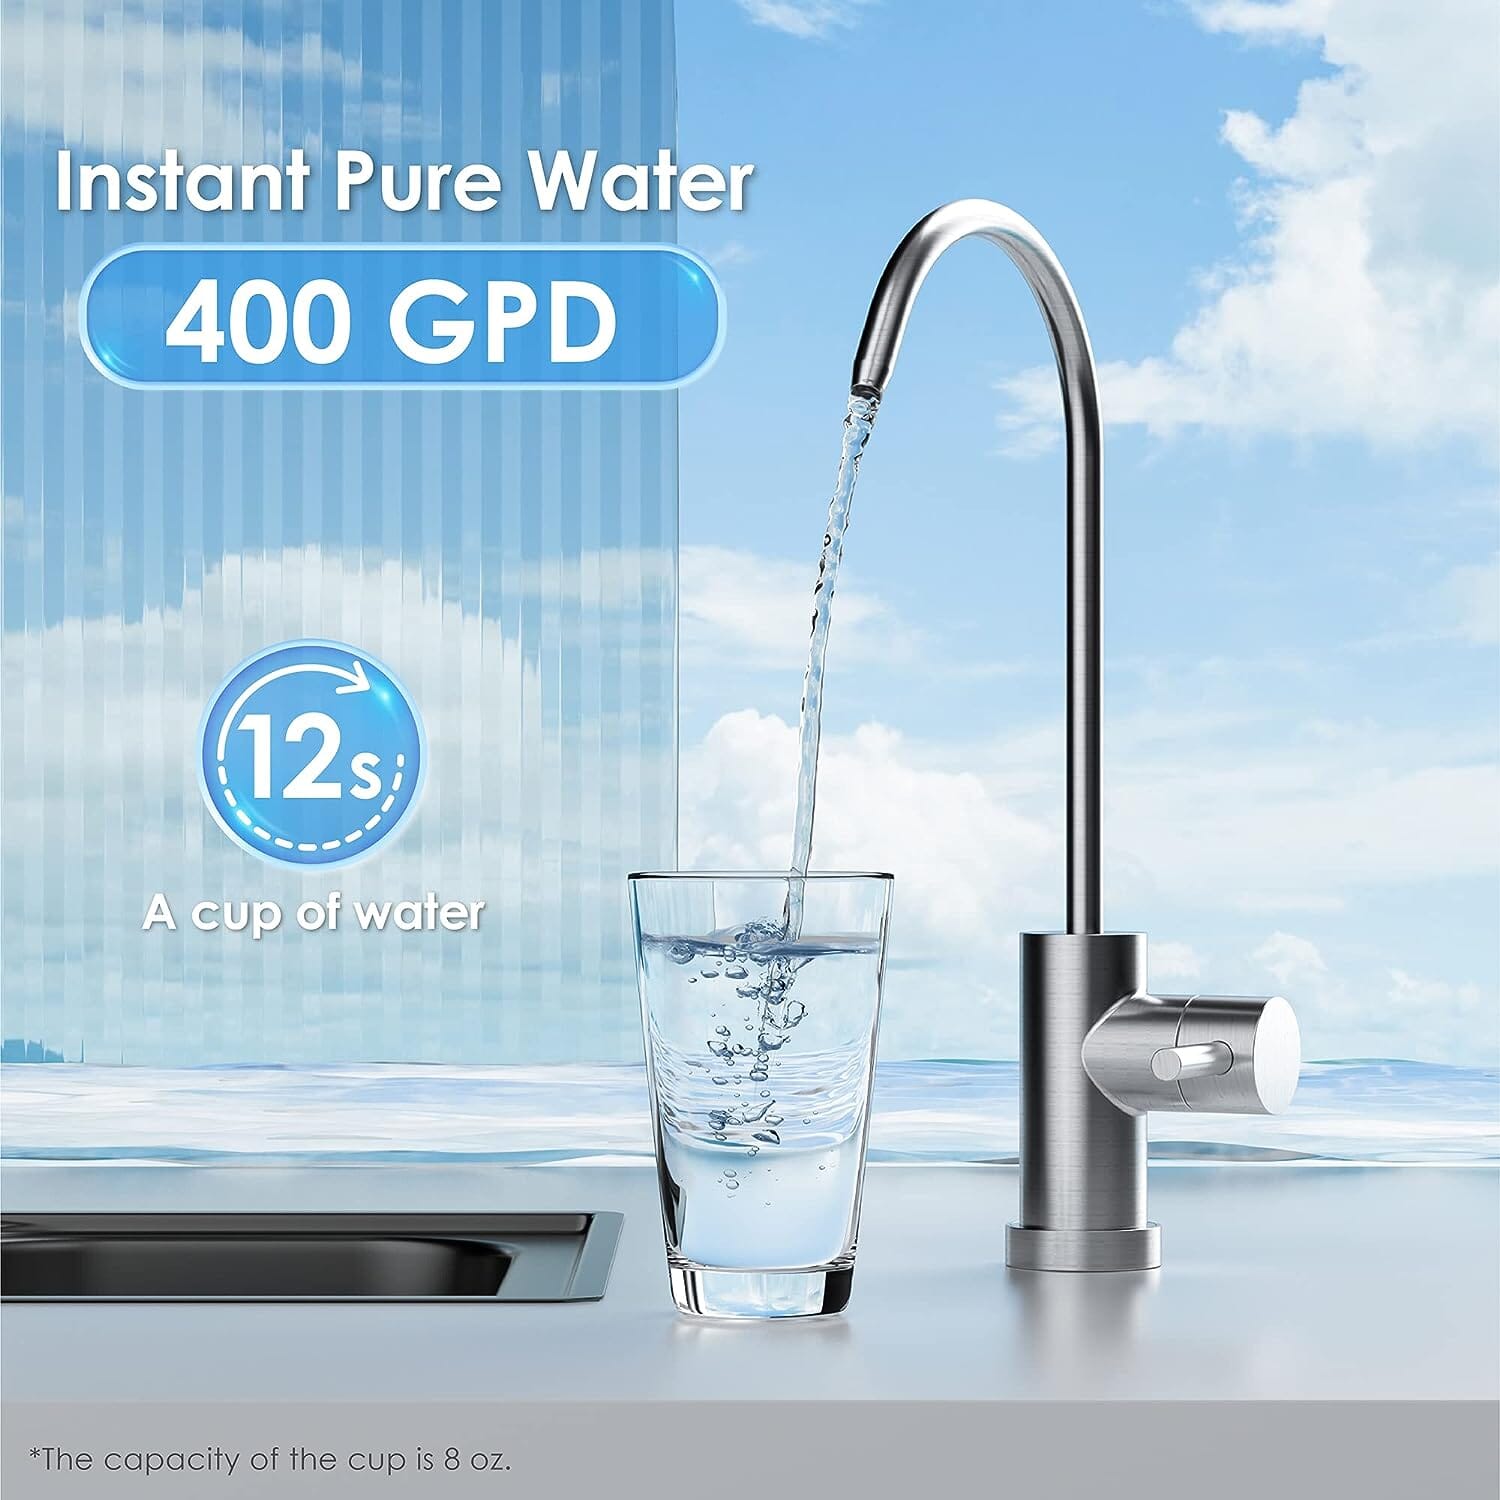 Waterdrop G2 Remineralization RO System